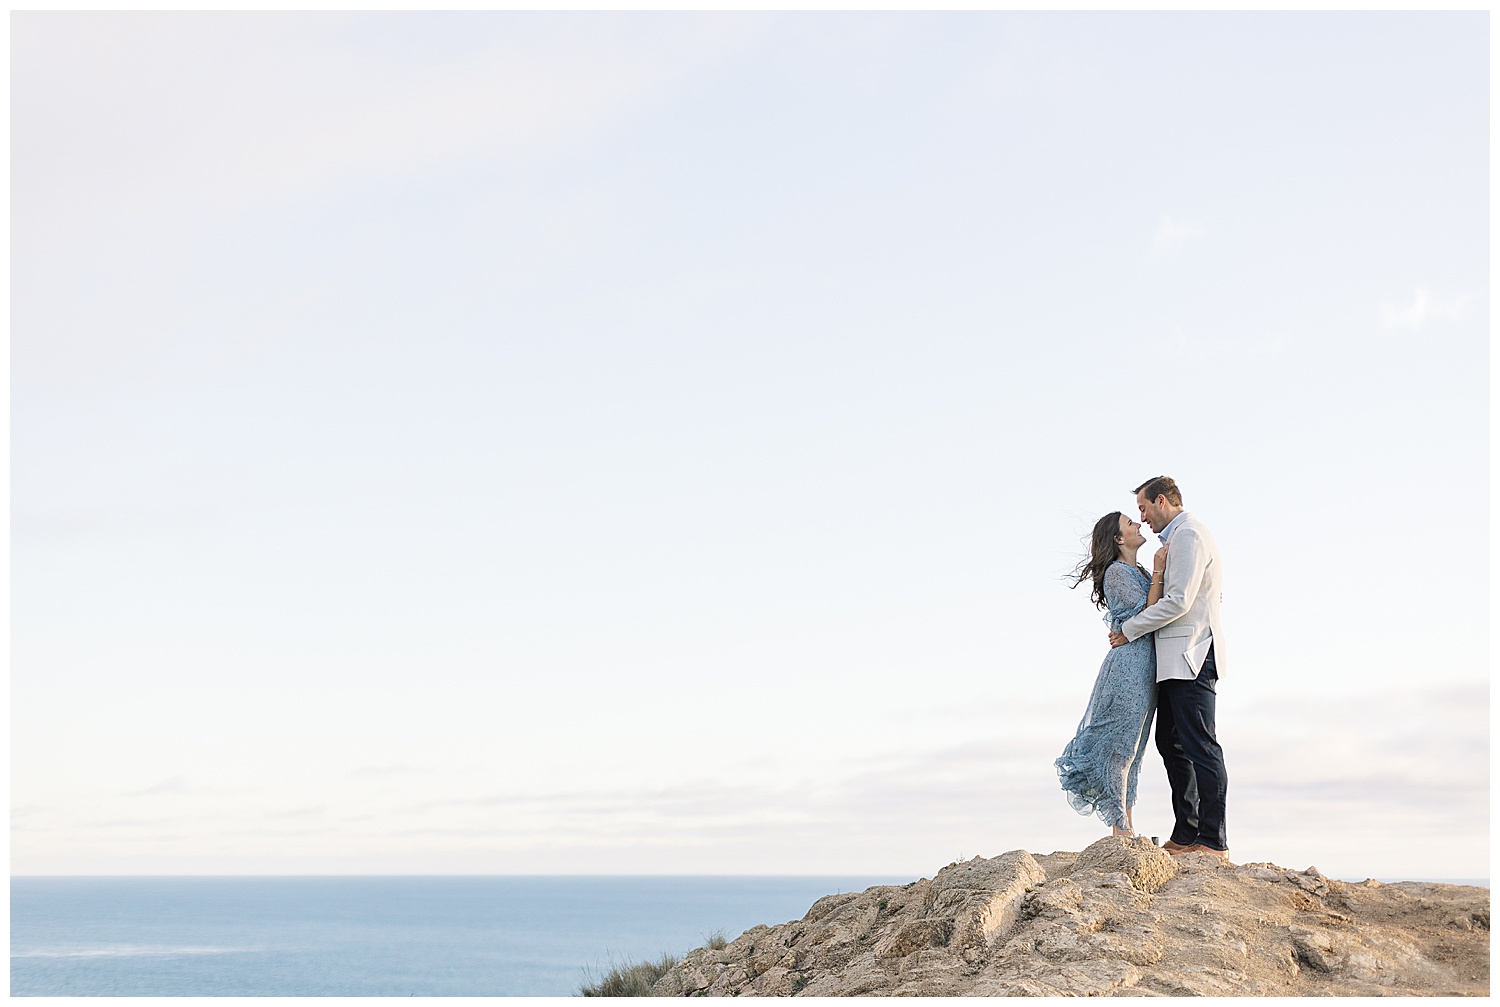 photo of couple embracing near the top of a cliff with the ocean behind them by film photographer AGS Photo Art